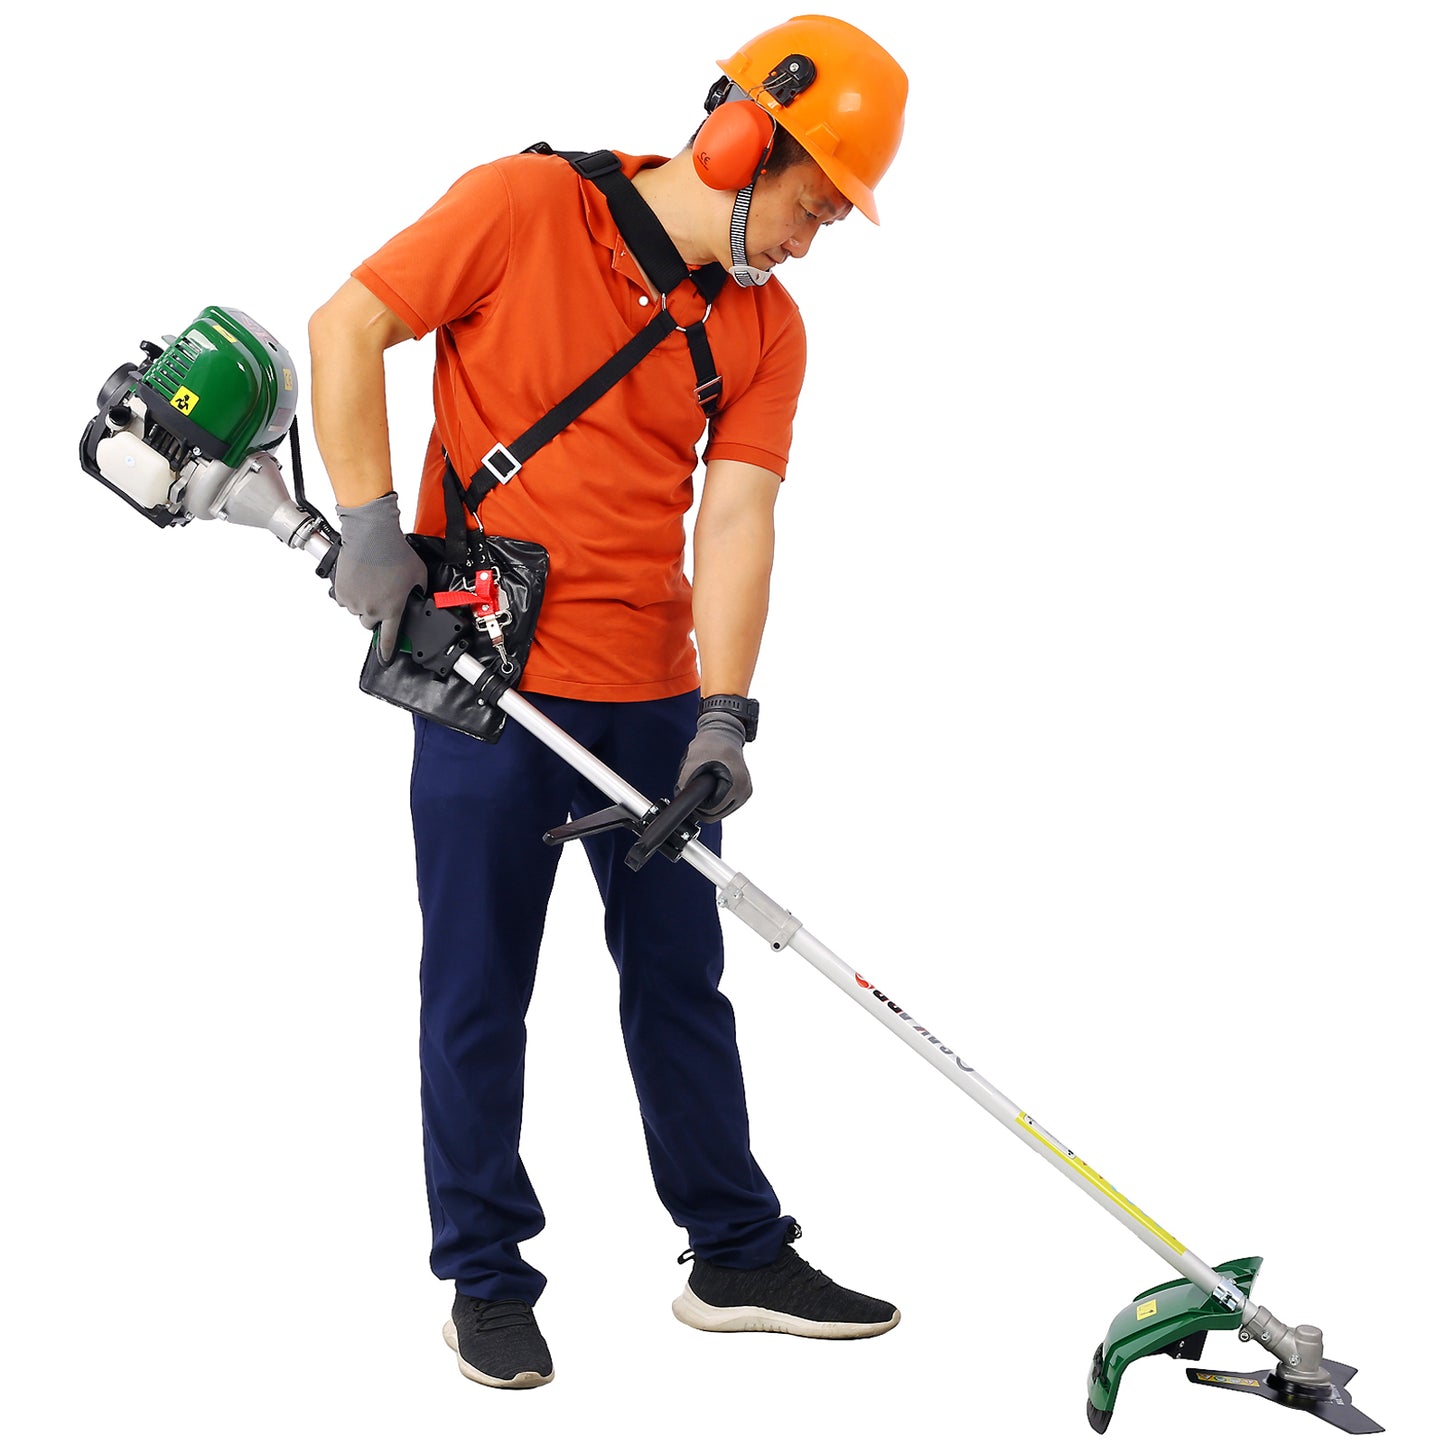 4 in 1 Multi-Functional Trimming Tool, 38CC 4 stroke Garden Tool System with Gas Pole Saw, Hedge Trimmer, Grass Trimmer, and Brush Cutter EPA Compliant